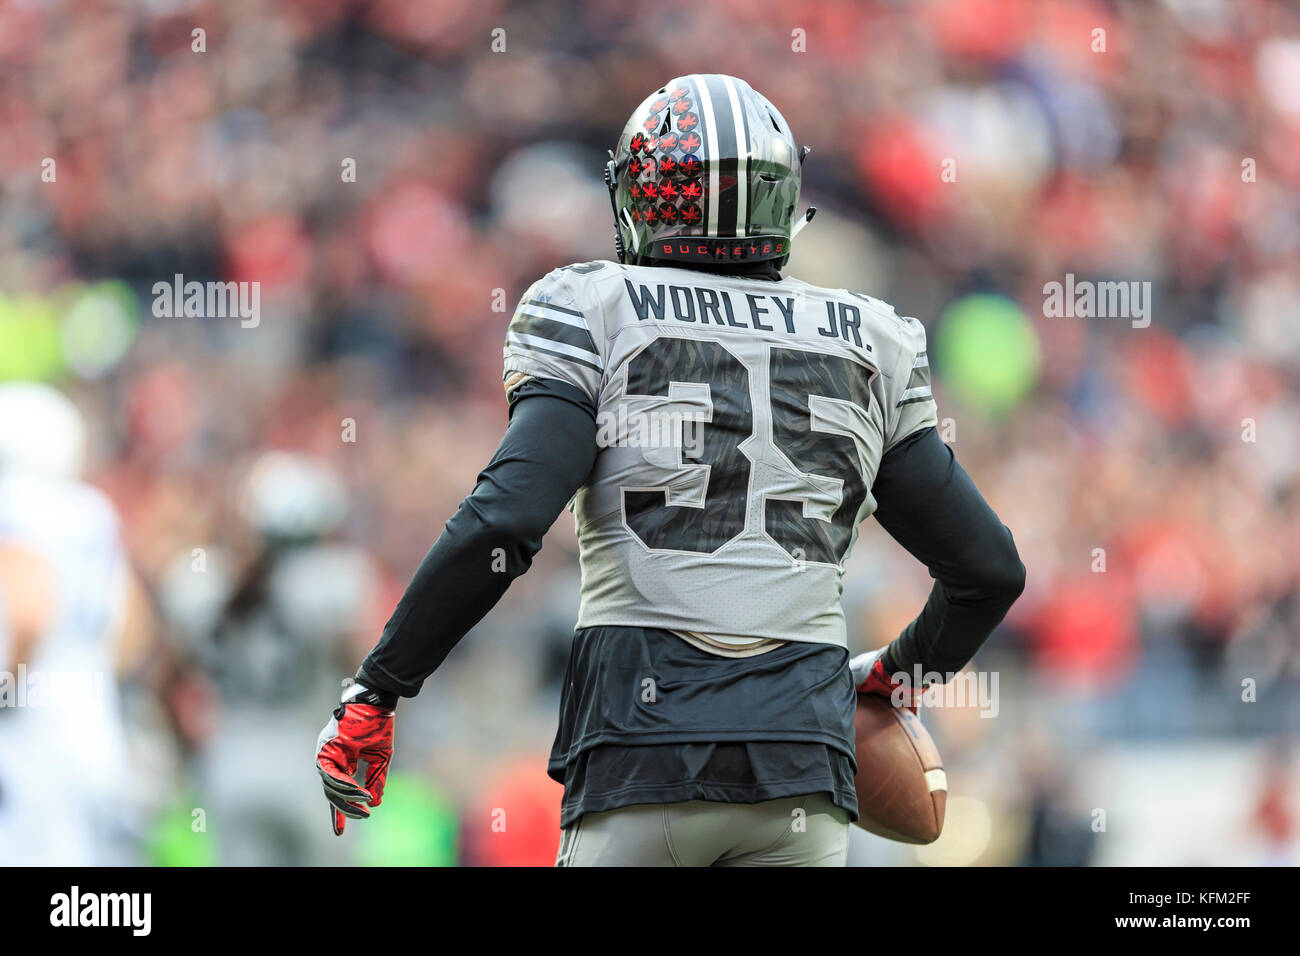 Chris Worley High Resolution Stock Photography and Images - Alamy